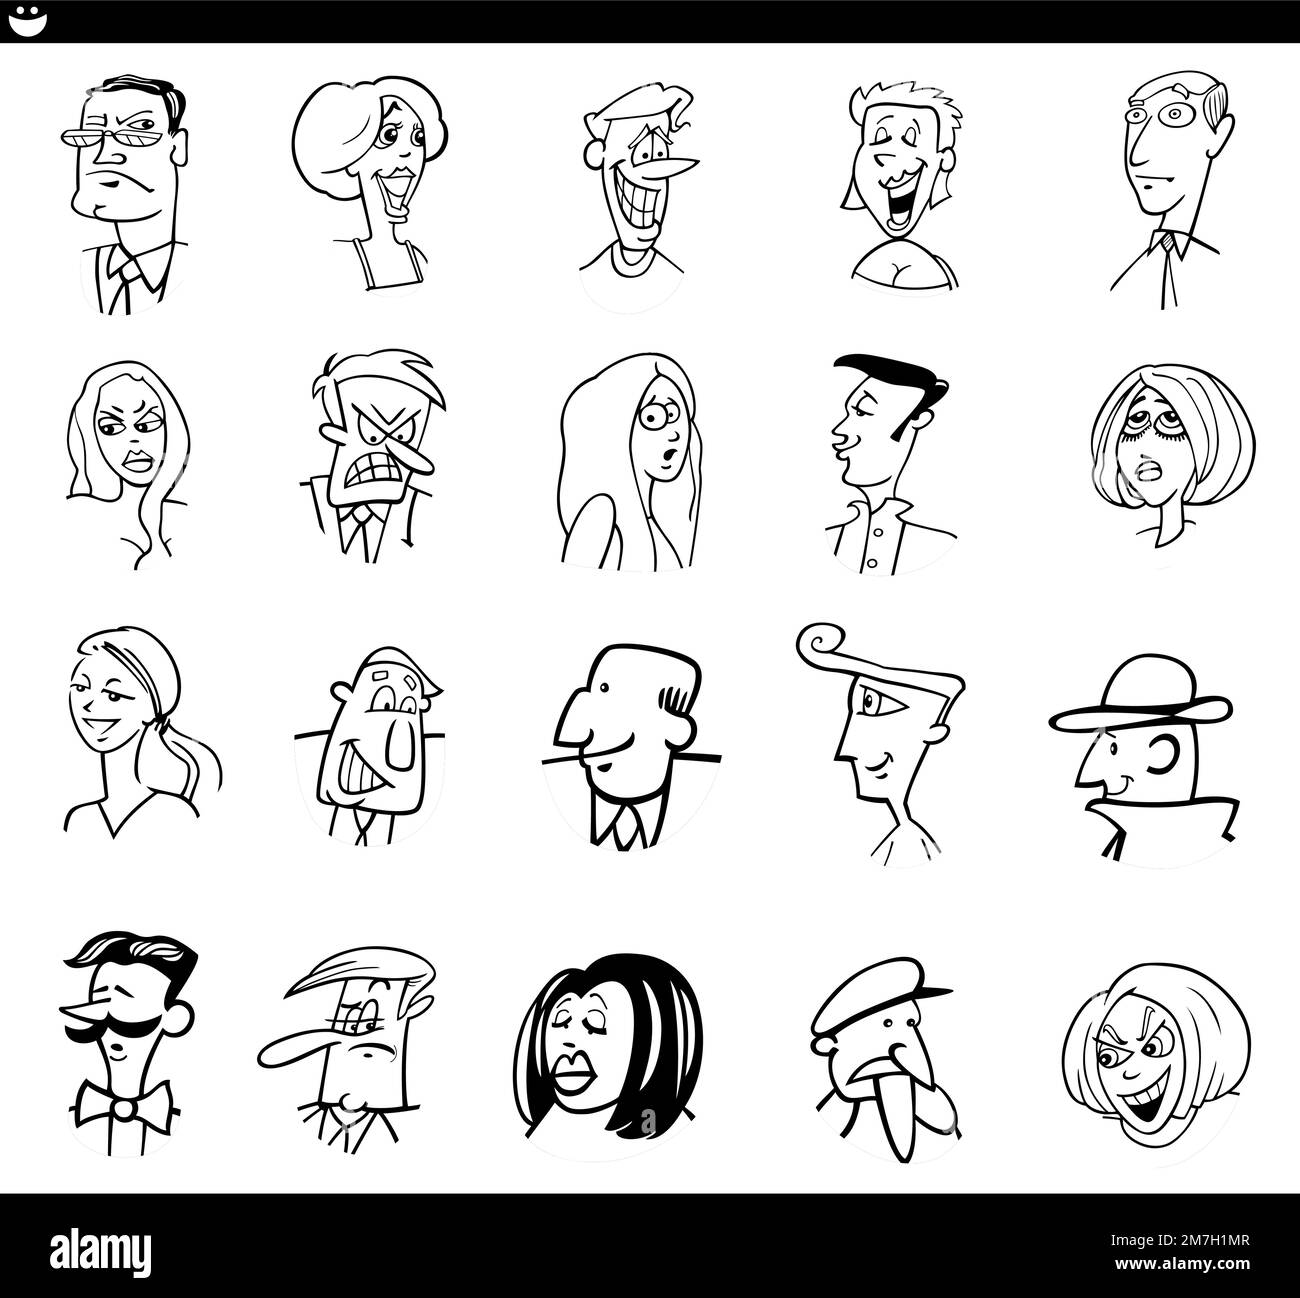 Black and white cartoon illustration of funny people characters faces set Stock Vector